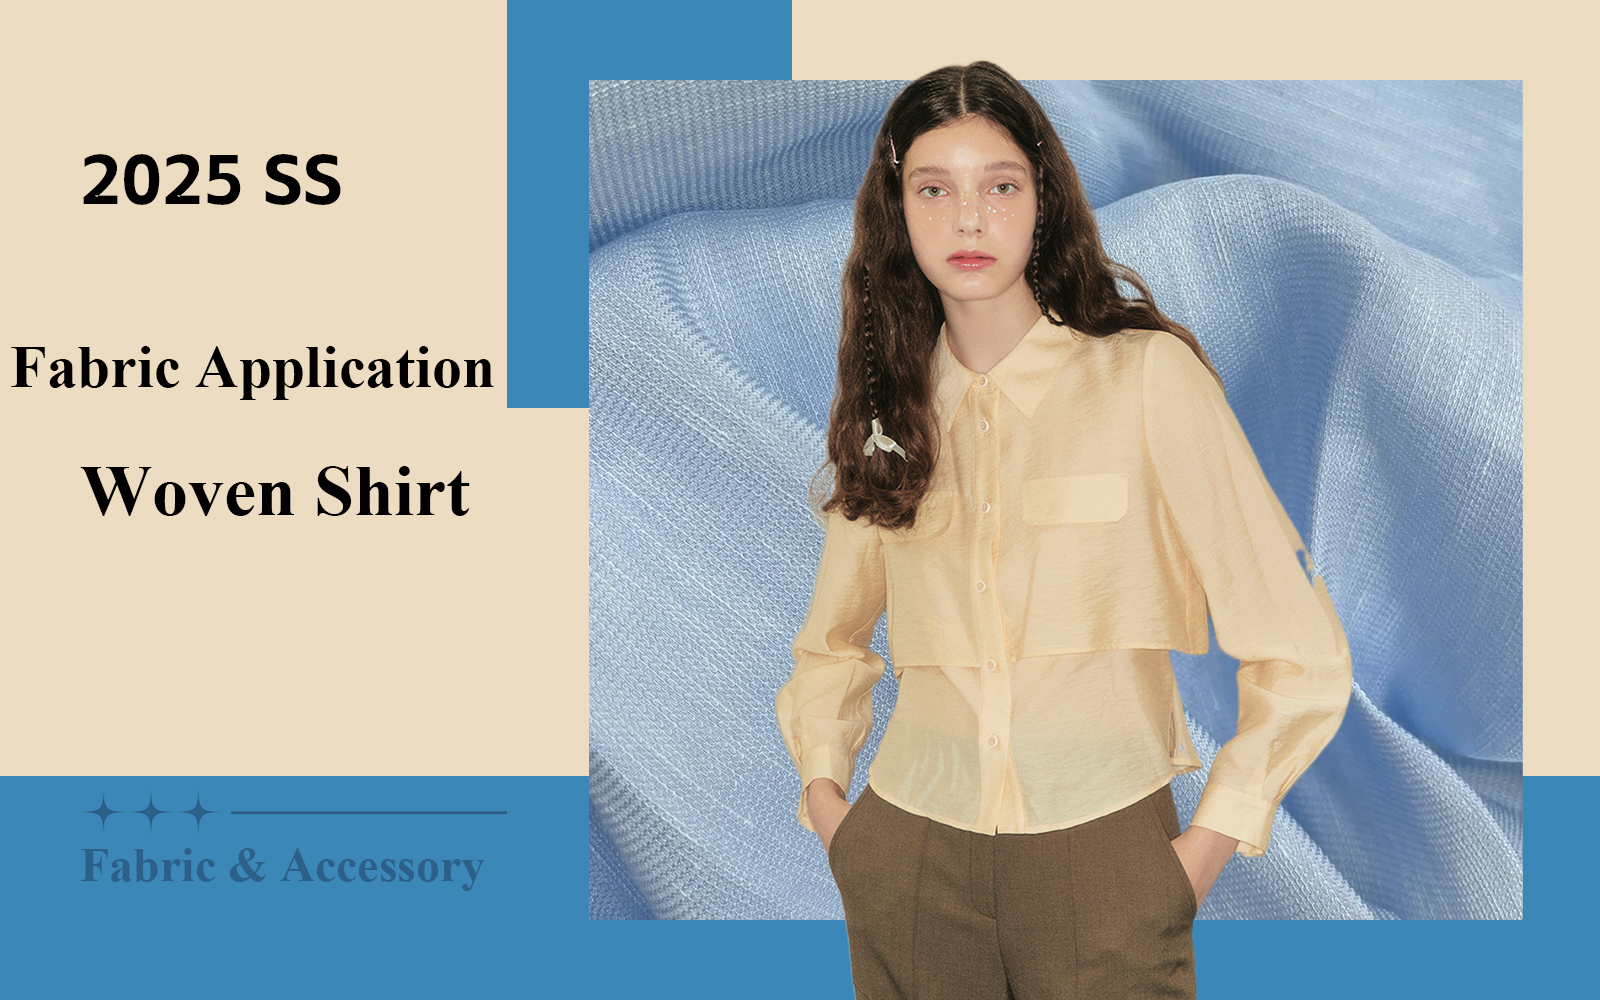 The Fabric Trend for Women's Woven Shirt